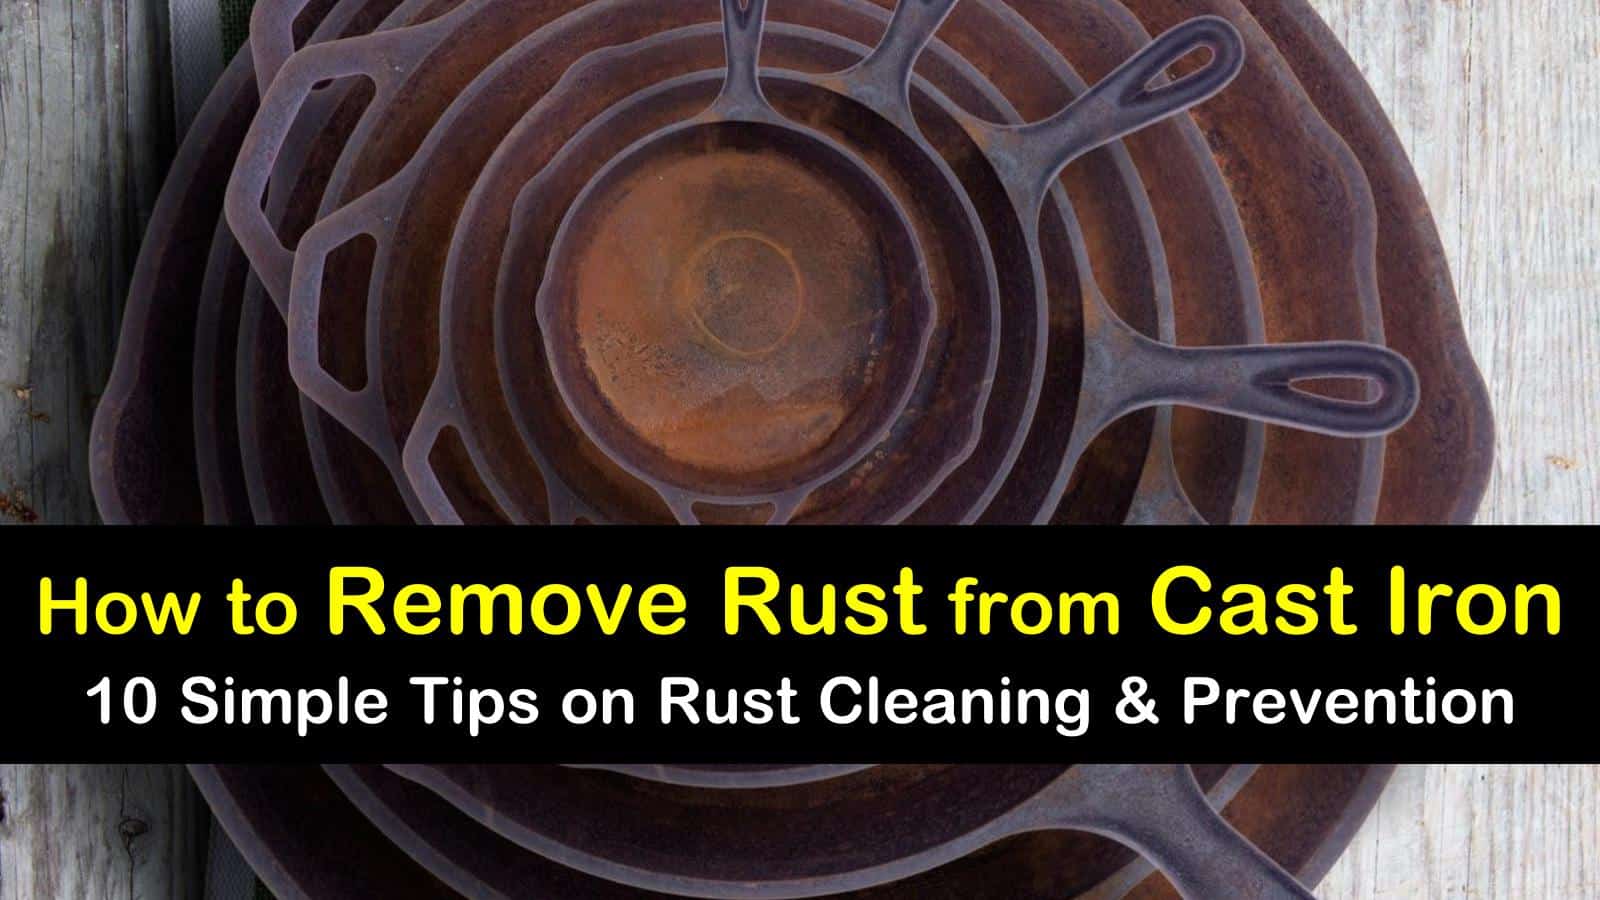 how to remove rust from cast iron titleimg1